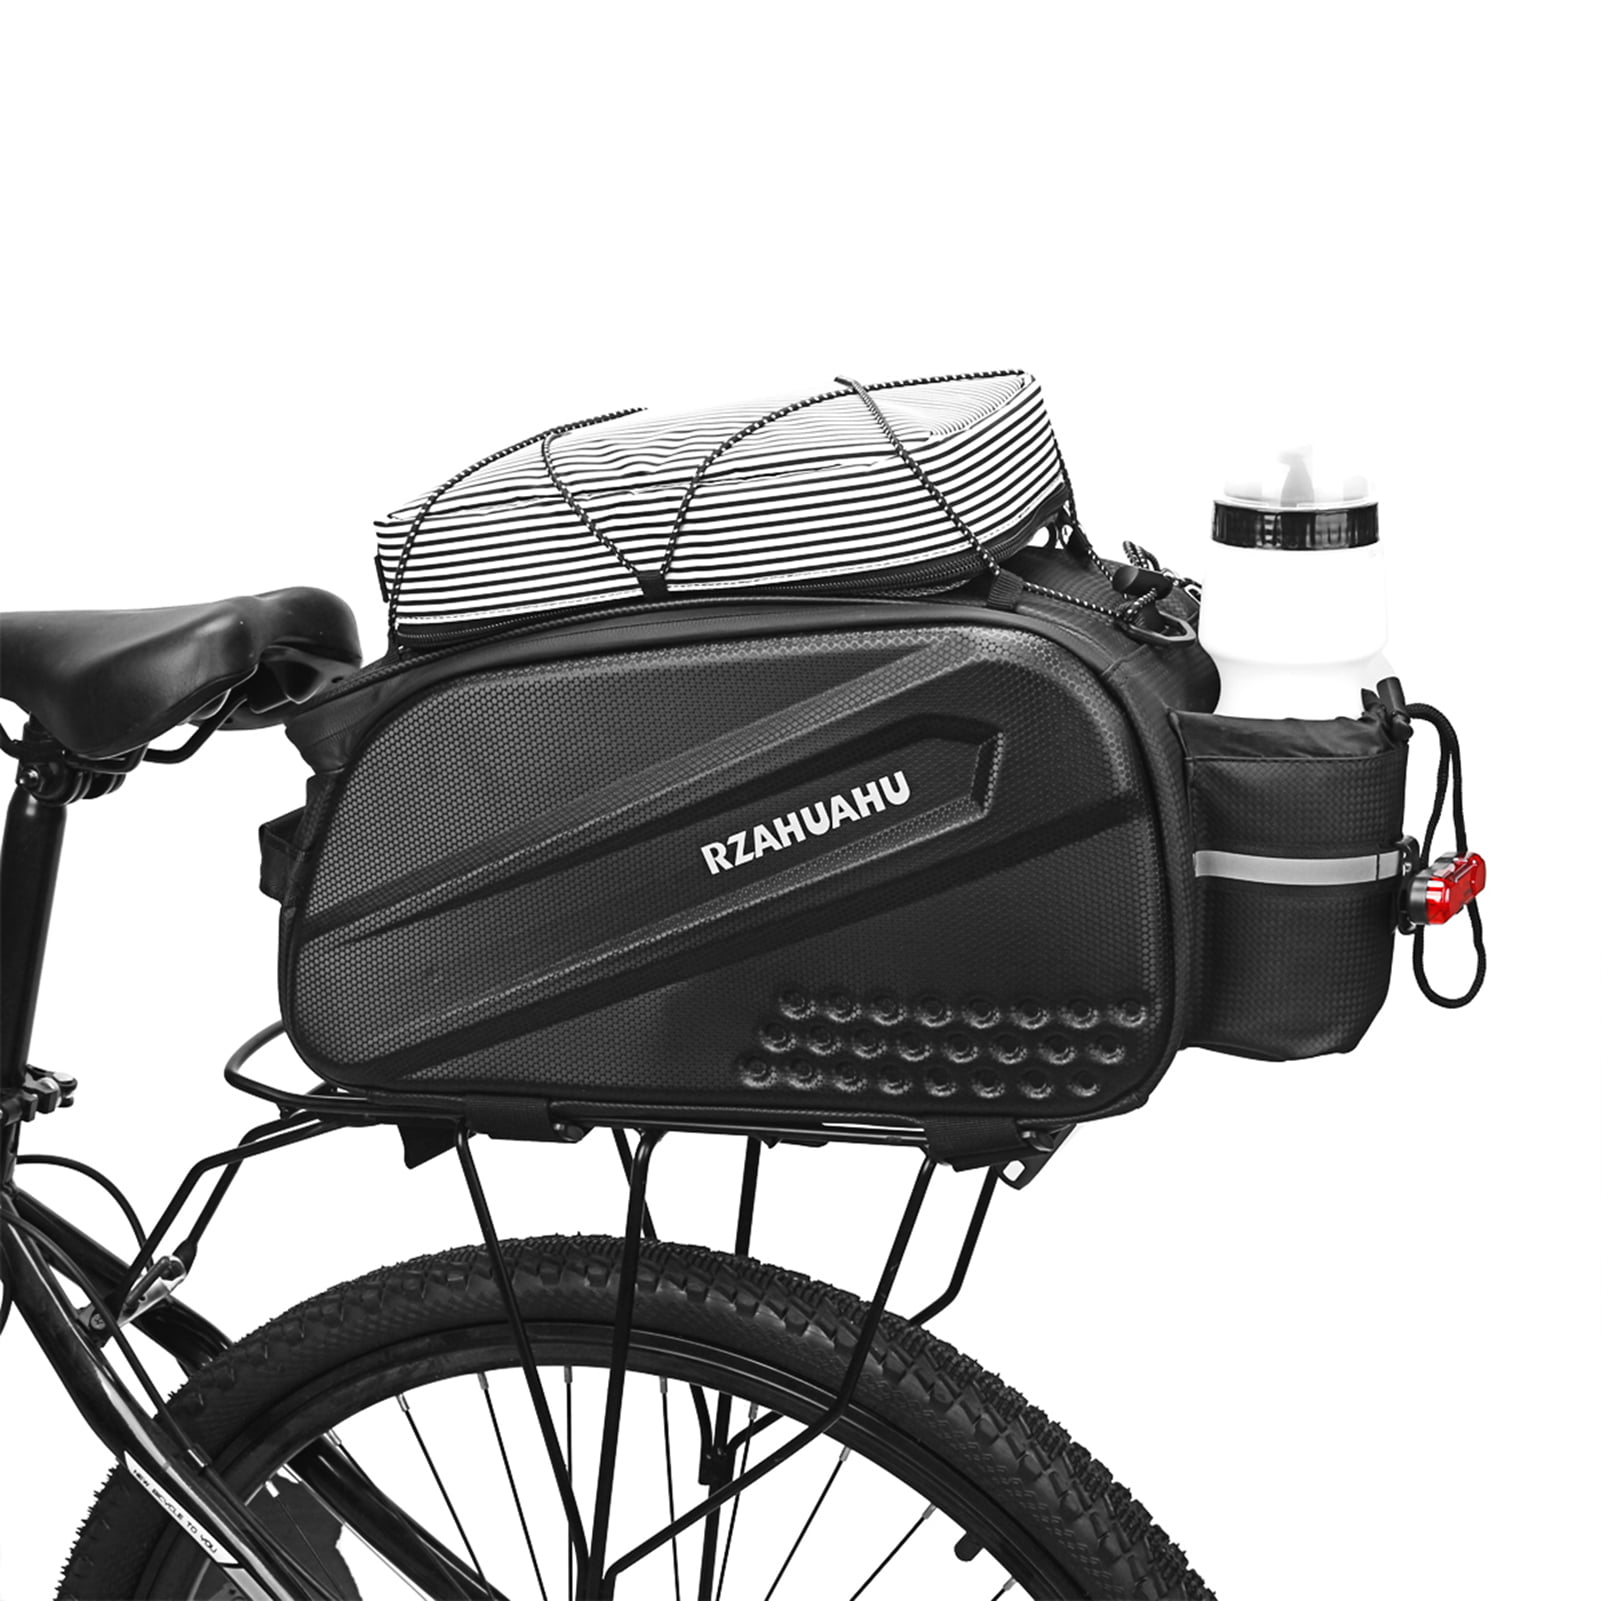 10L Bicycle Rear Rack Bag Insulated Storage 14.966.16.3 inch Homa Bike Rear Rack Bag with Tail Light Design Bicycle Seat Multifunctional Insulated Trunk Cooler Bag 